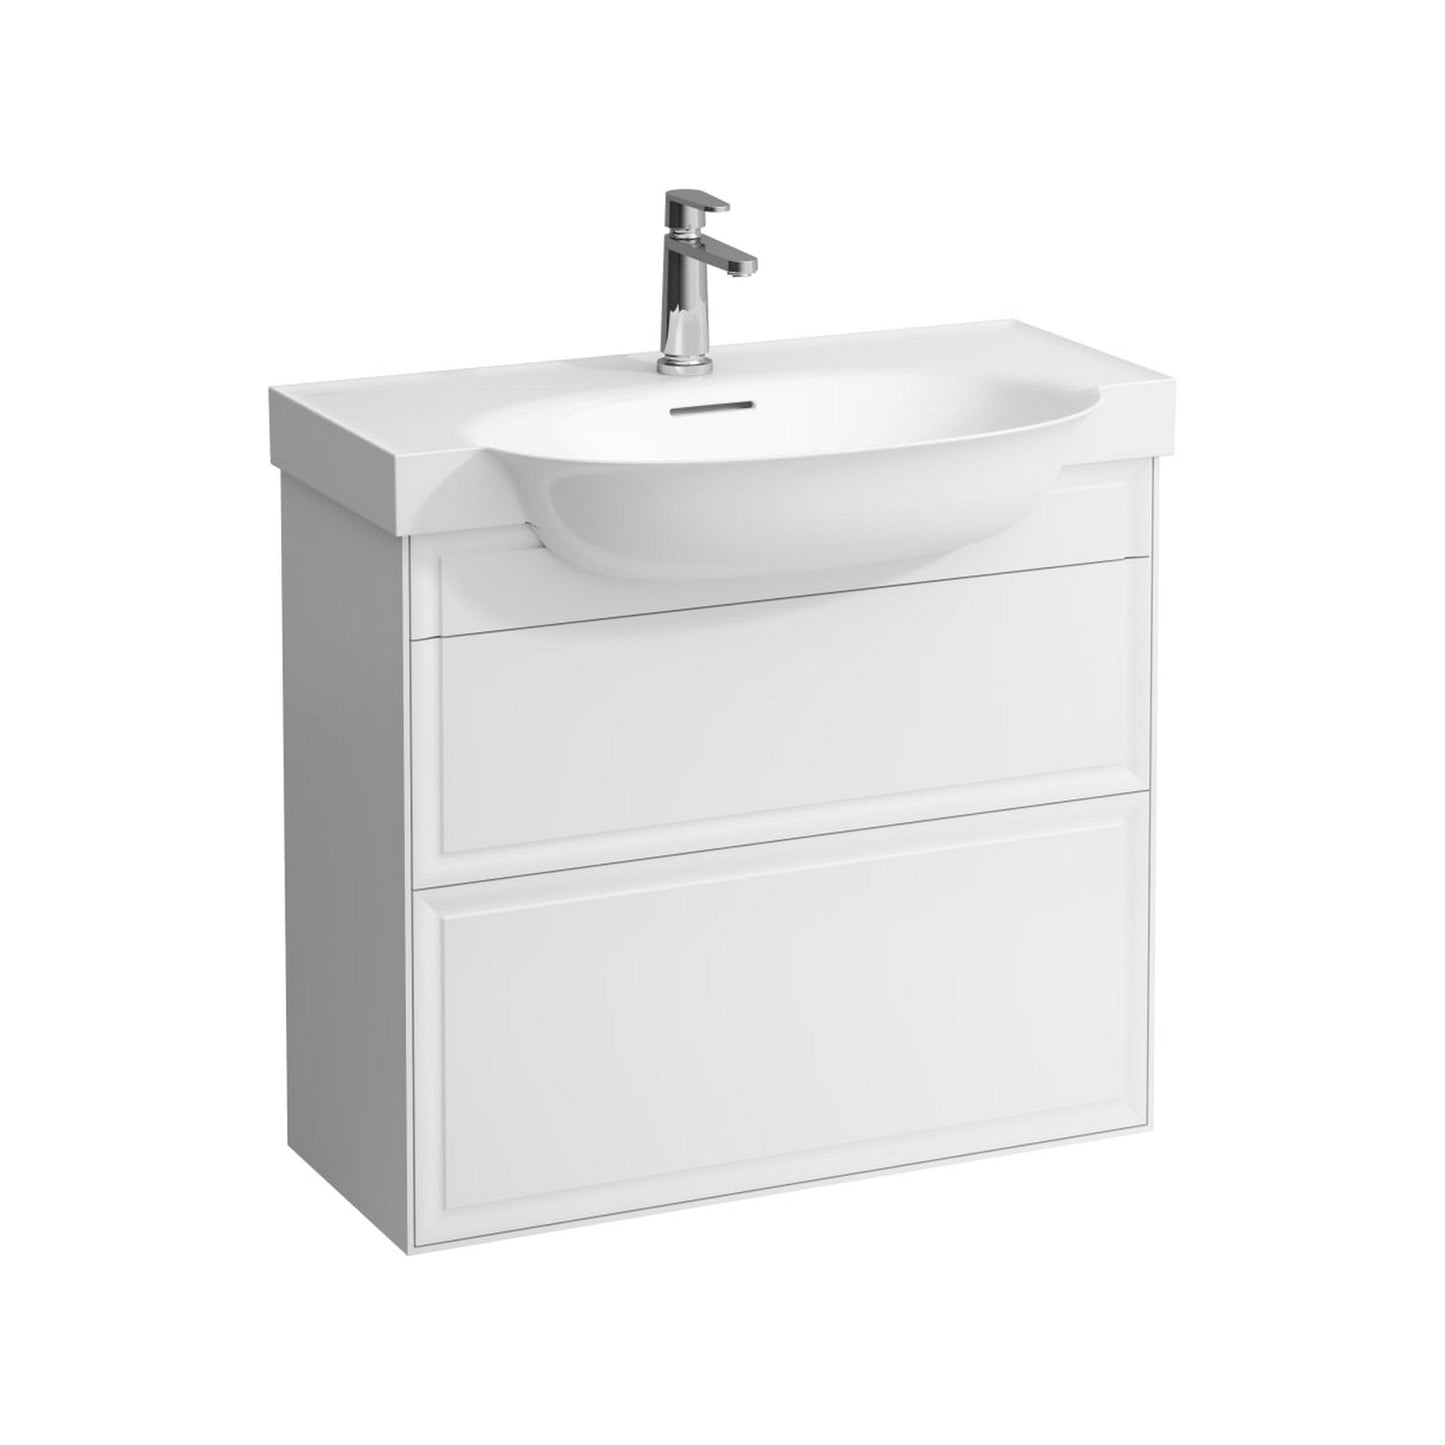 Laufen New Classic 31" 2-Drawer Matte White Wall-Mounted Vanity for New Classic Bathroom Sink Model: H813855